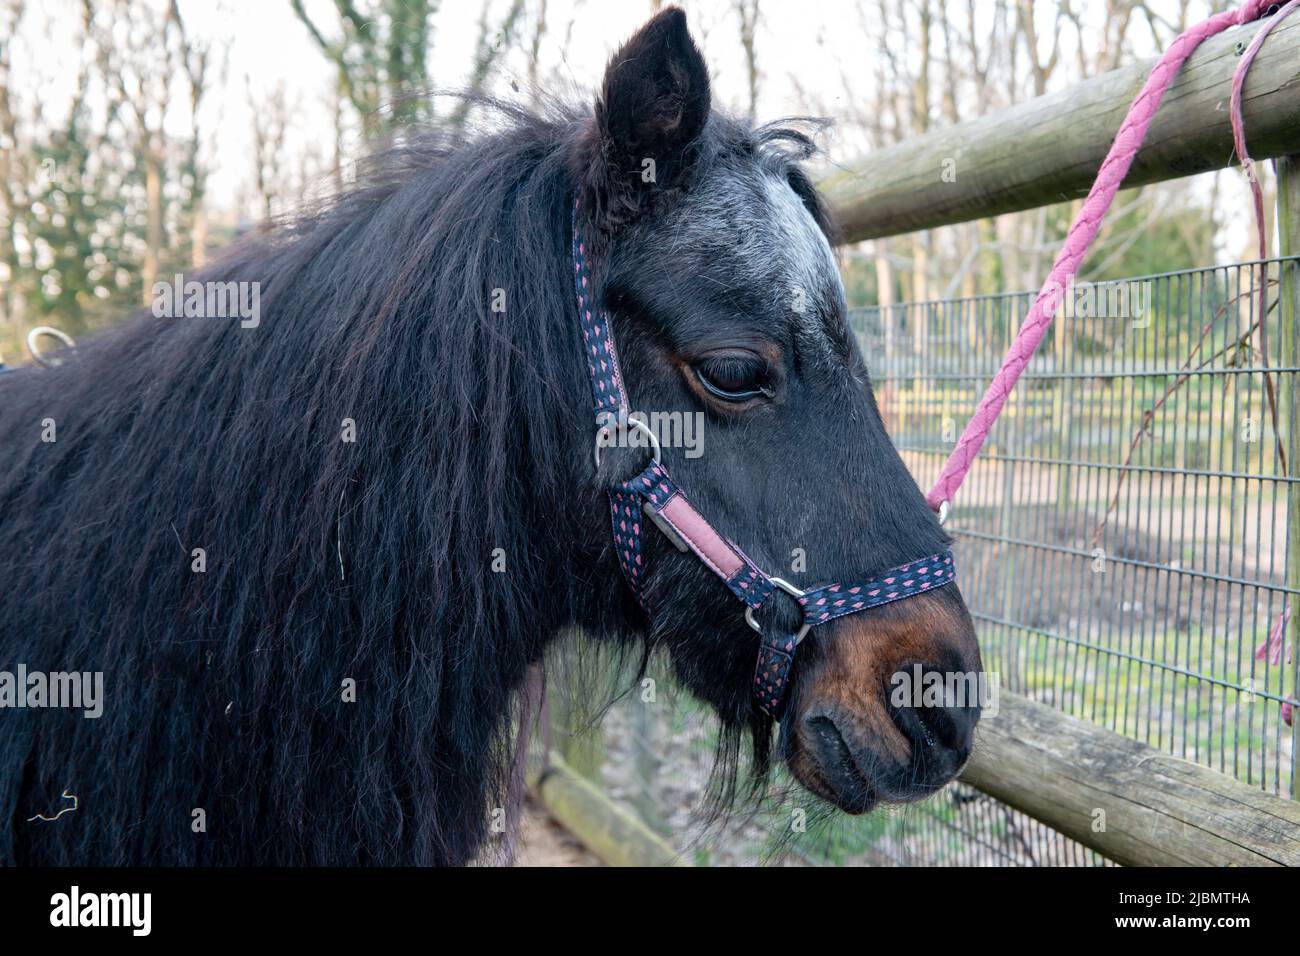 Profile of black shetland pony face, head, mane and muzzle in a bright bridle Stock Photo